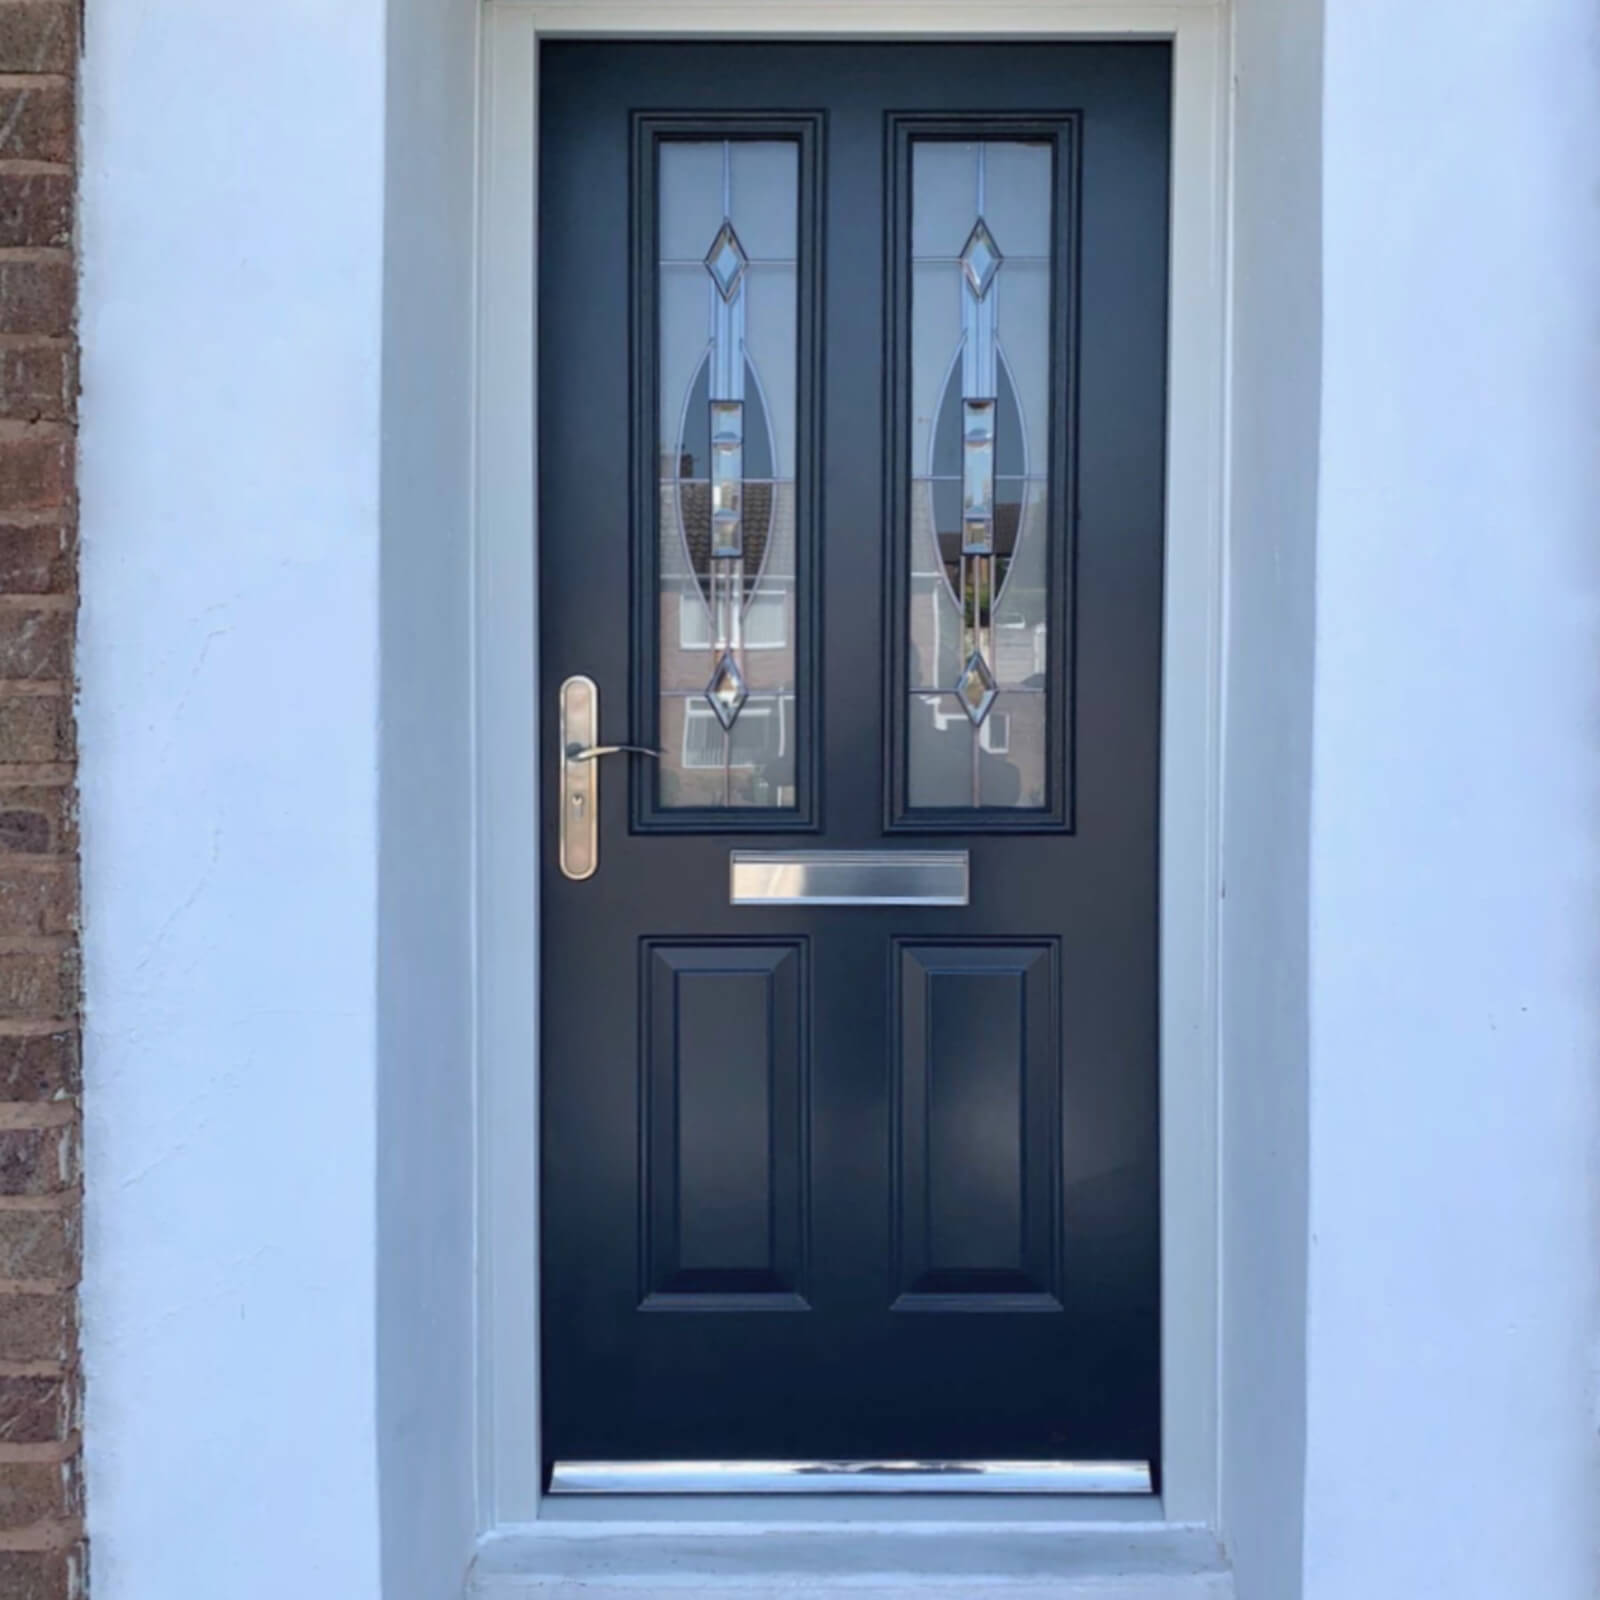 Anthracite grey traditional front door with patterned glass